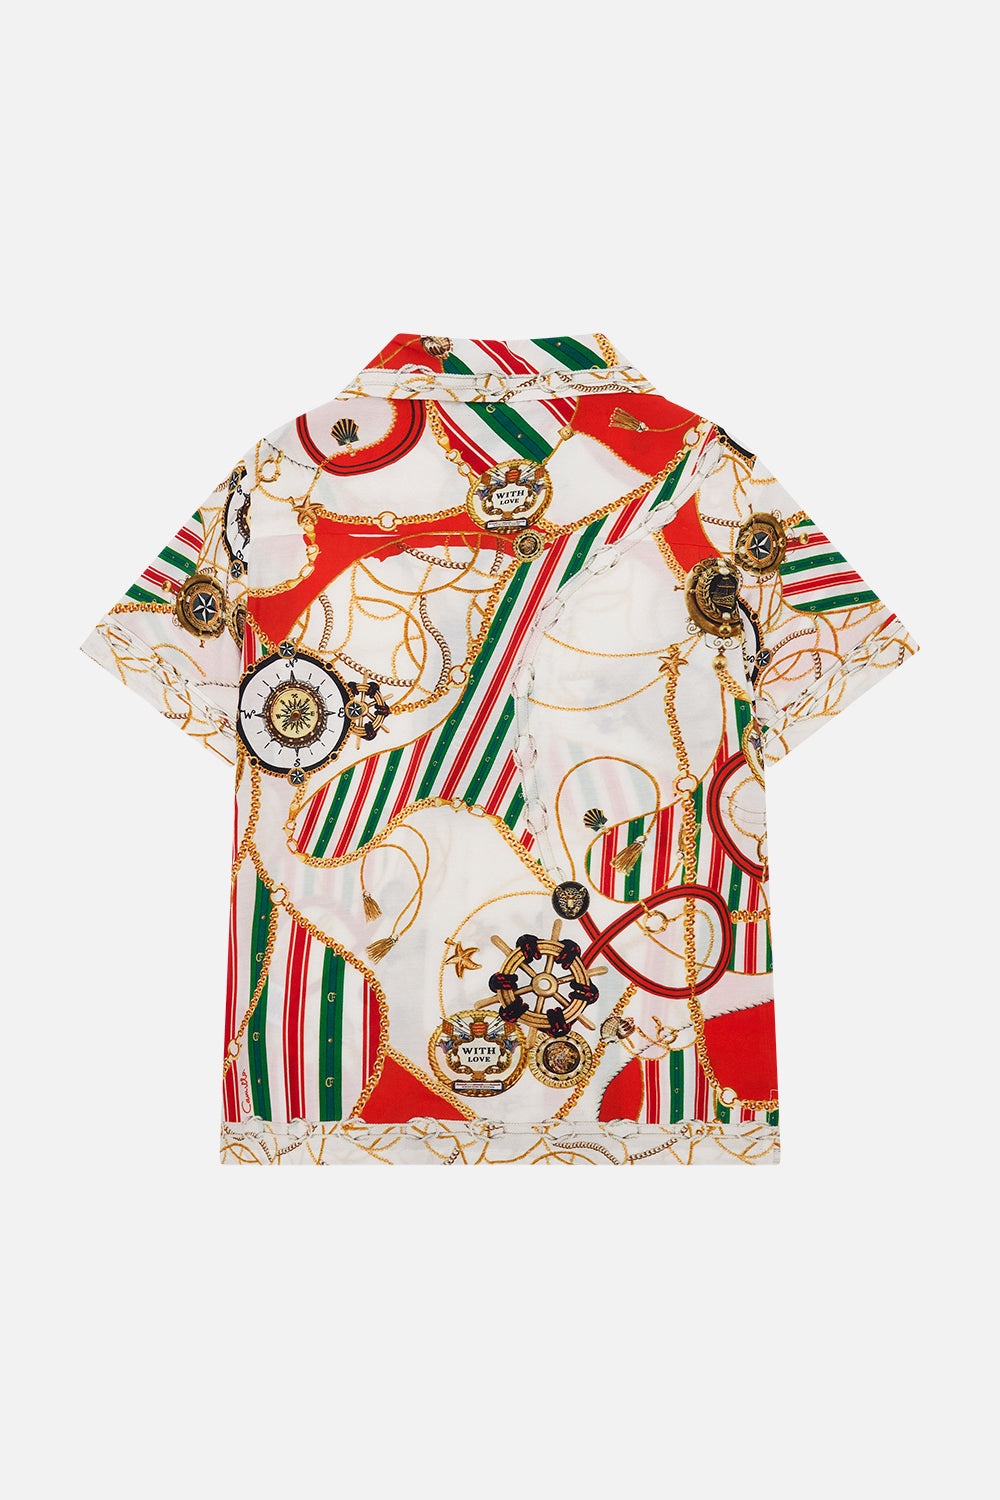 Product view of MILLA by CAMILLA boys shirt in Club Aperitivo print